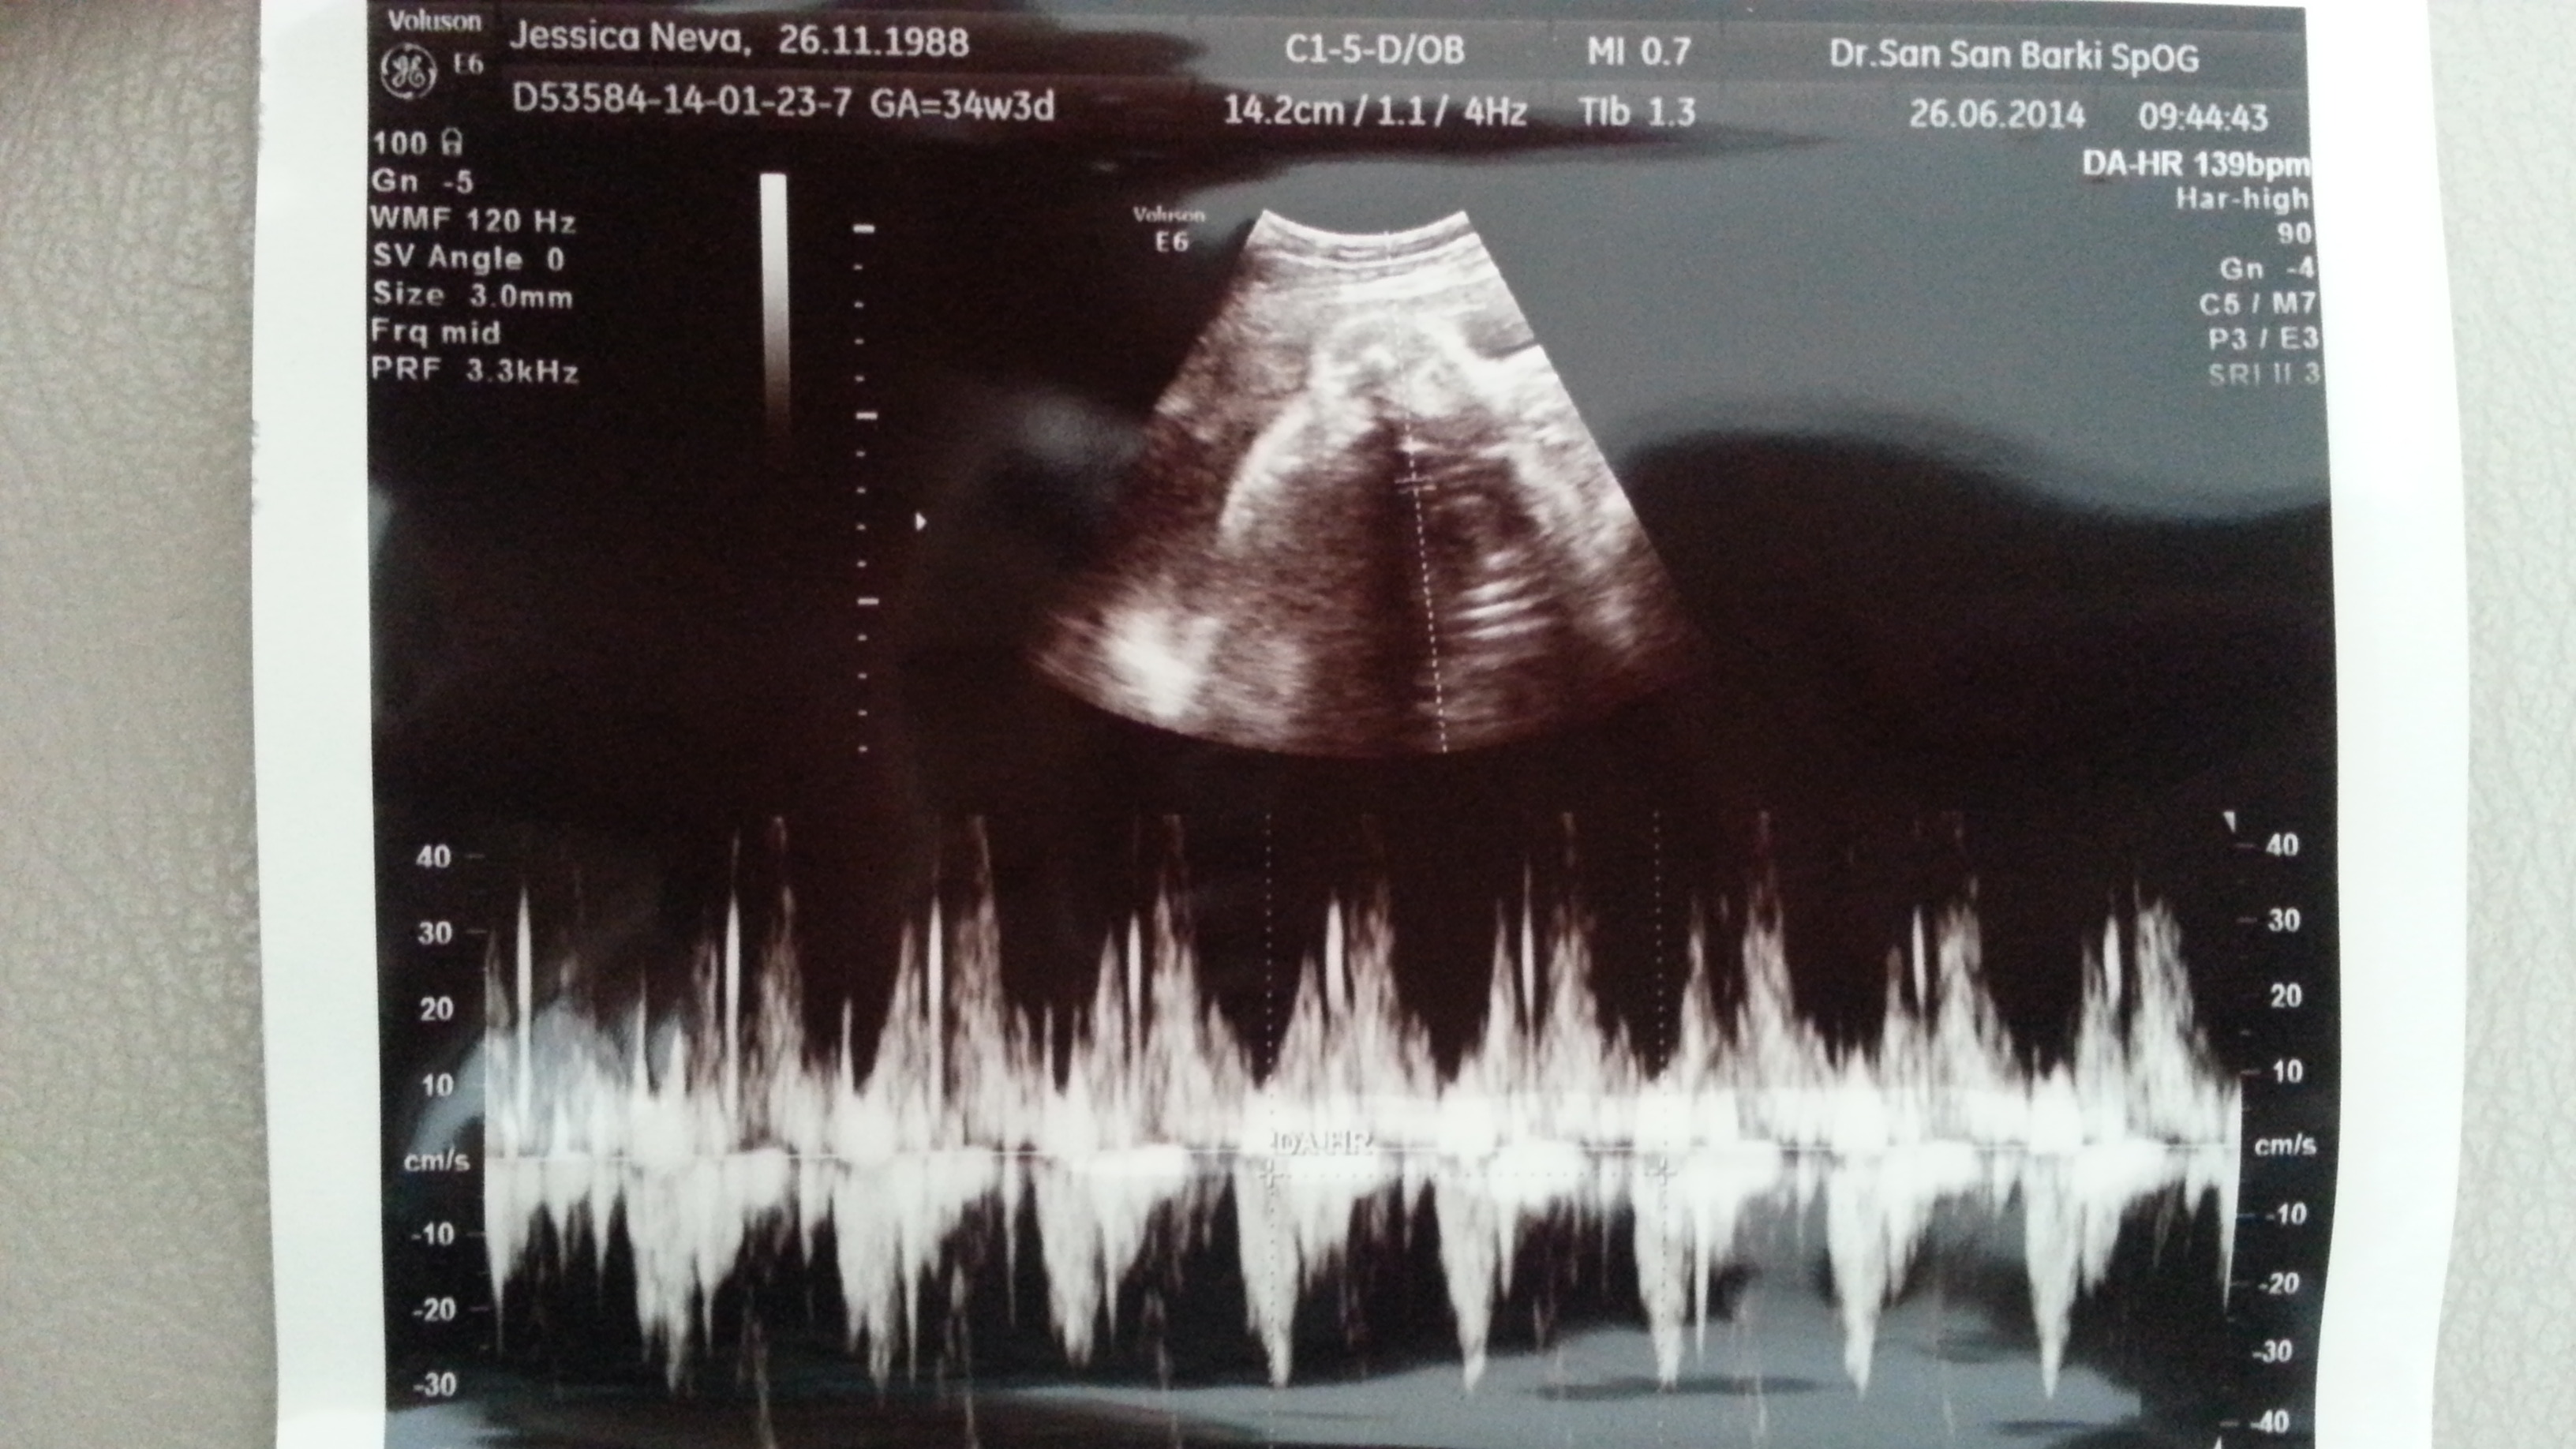 heartbeat at 34 weeks